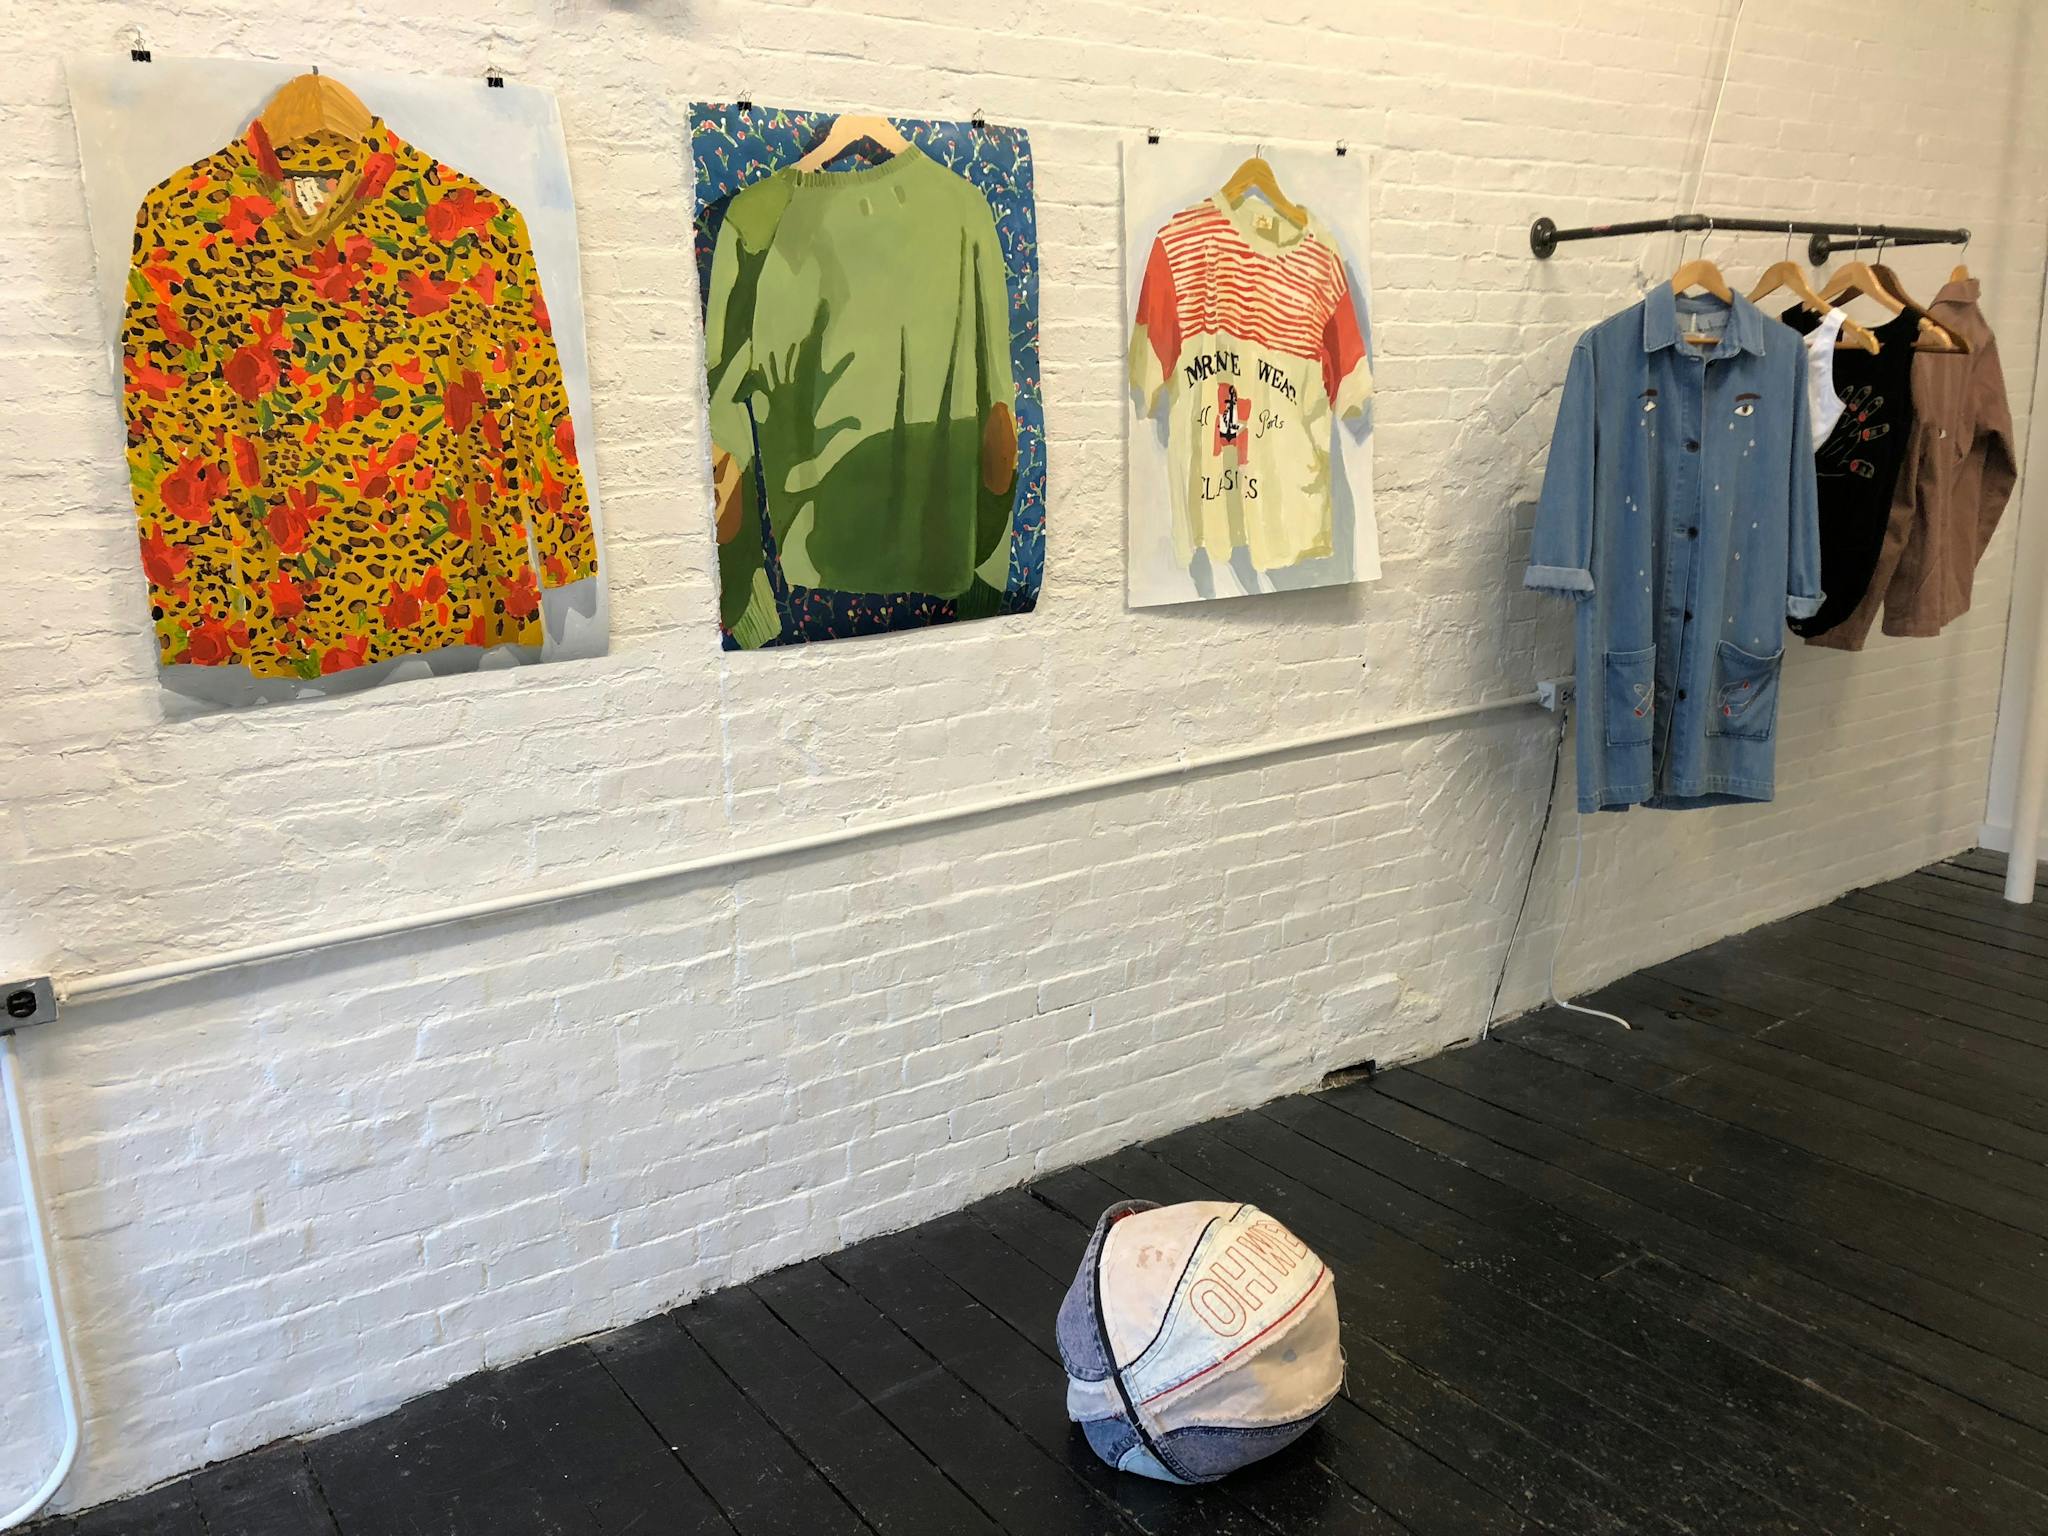 Image of one of the walls in the gallery with three paintings hung on the left and four clothing items hung on the right. Foregrounded on the floor is a basketball made out of cloth.